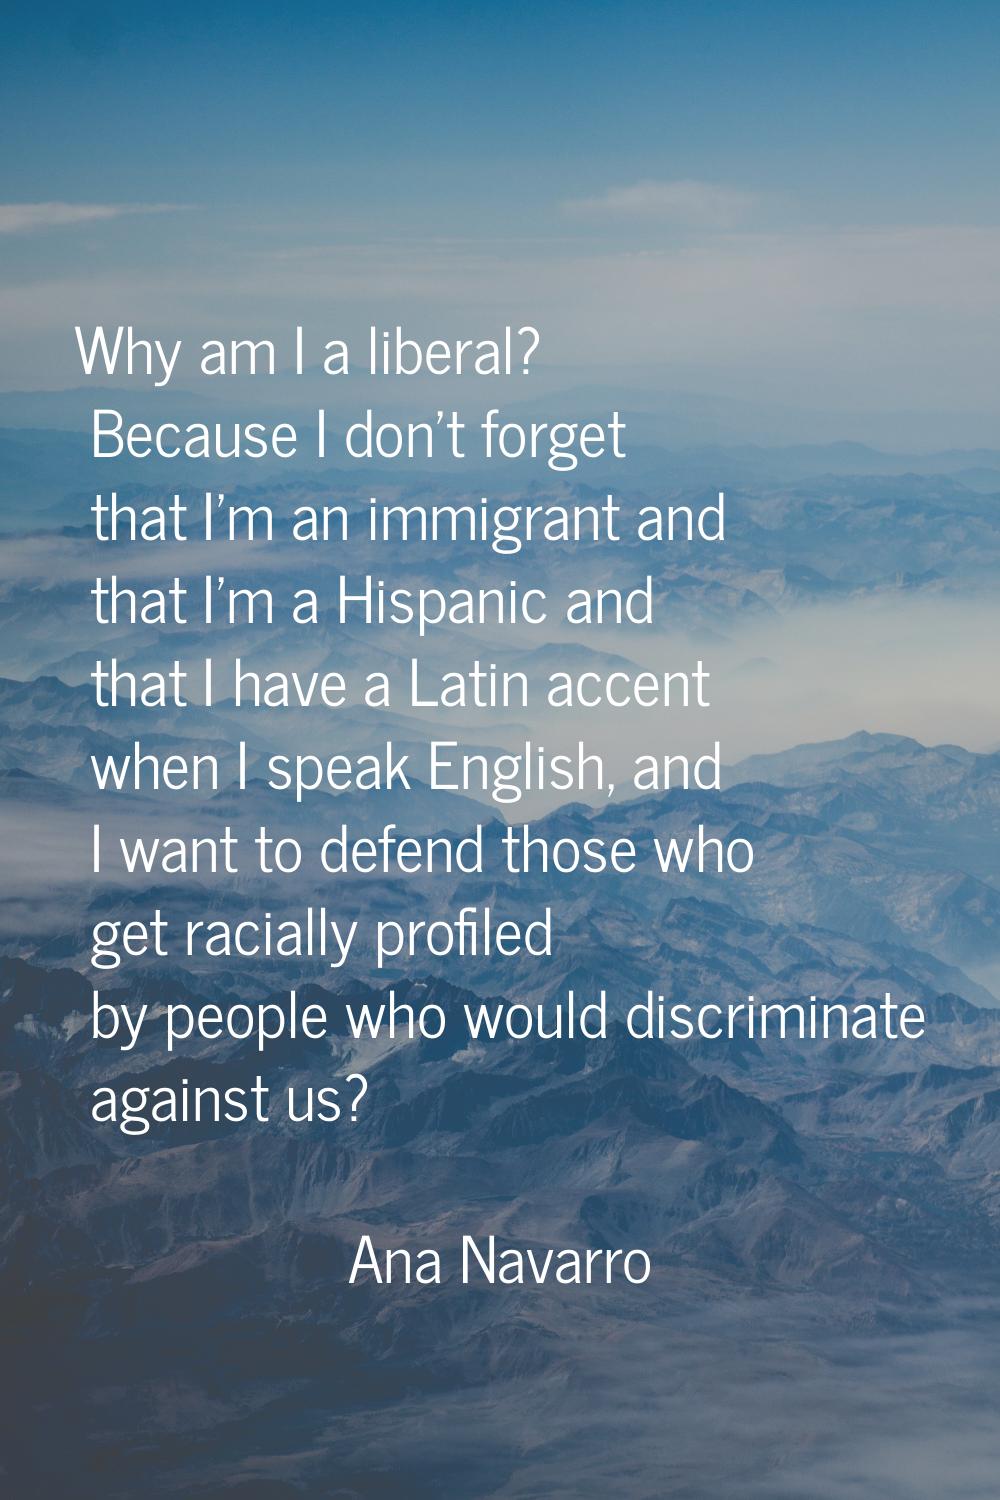 Why am I a liberal? Because I don't forget that I'm an immigrant and that I'm a Hispanic and that I